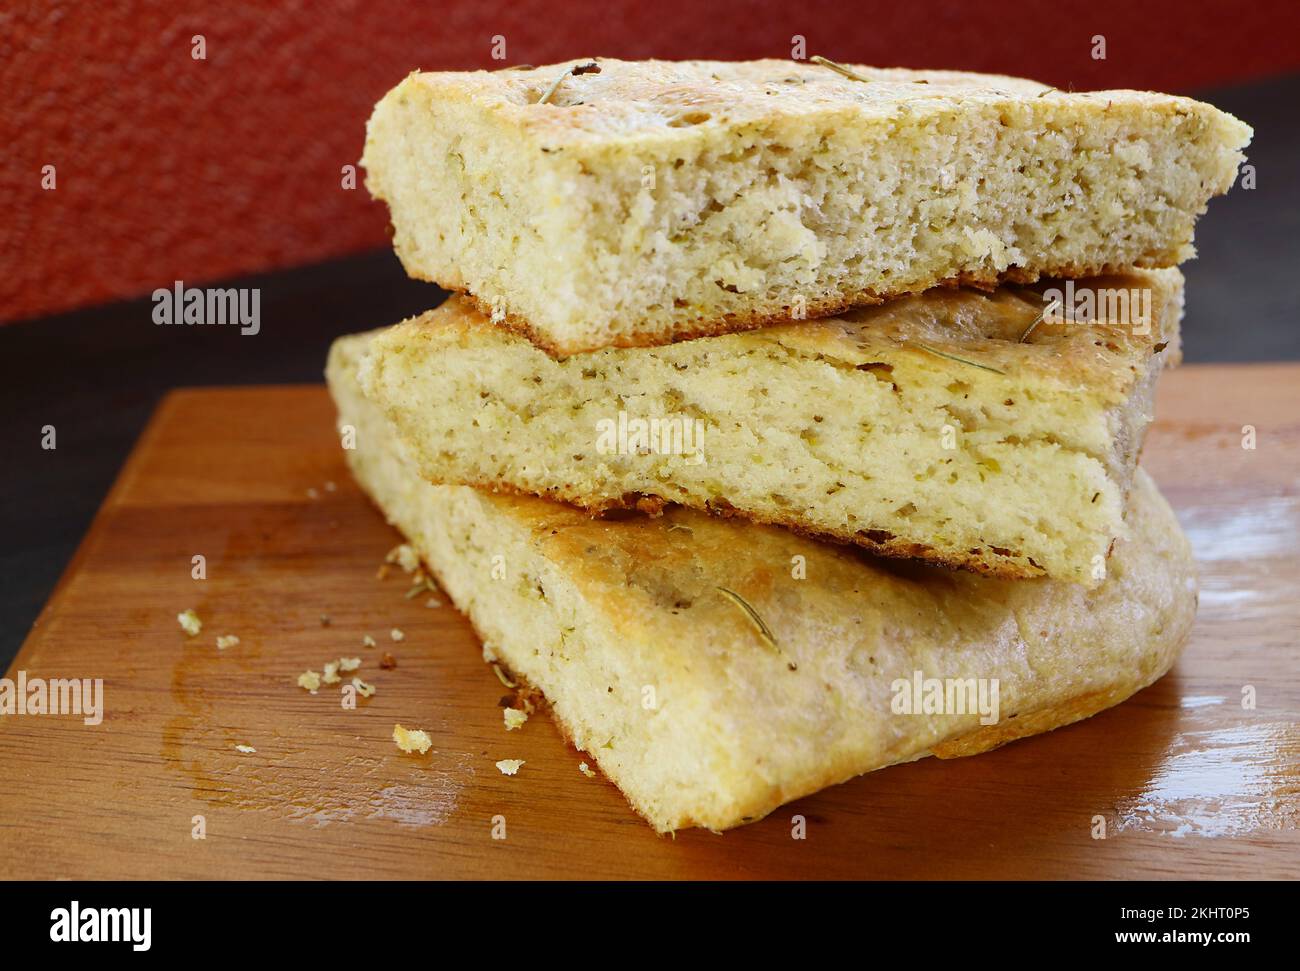 Closeup Mouthwatering Rosemary Focaccia Bread Slices Piled Up on Wooden Breadboard Stock Photo